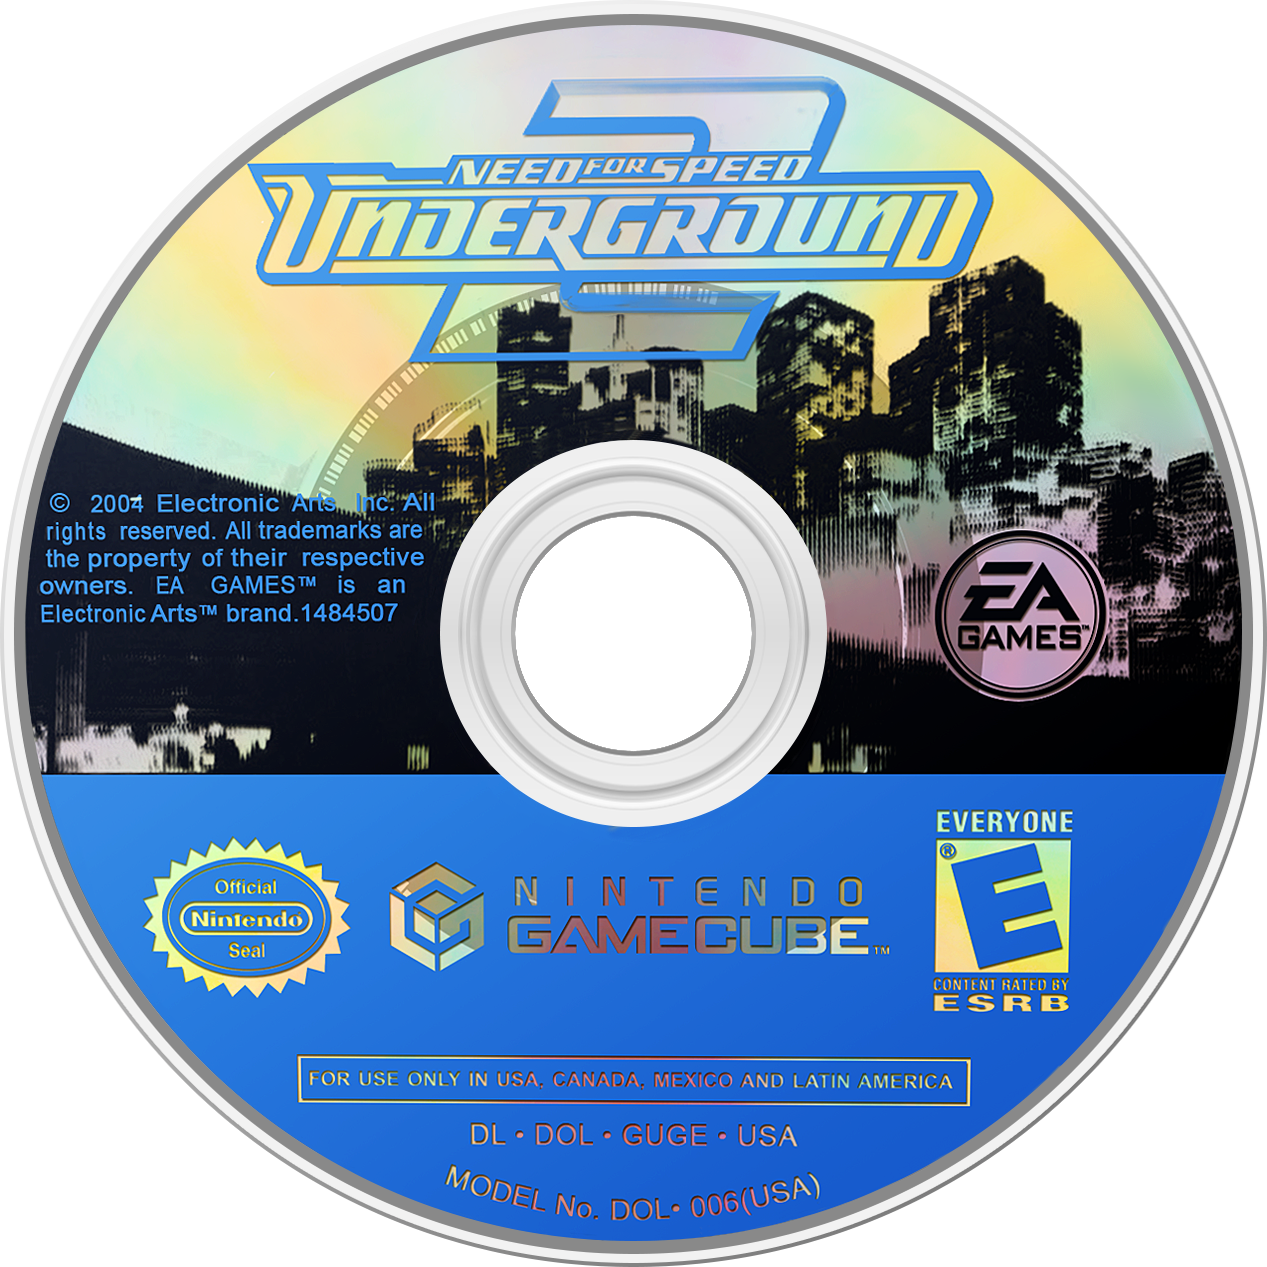 how to edit the files in need for speed underground 2 pc